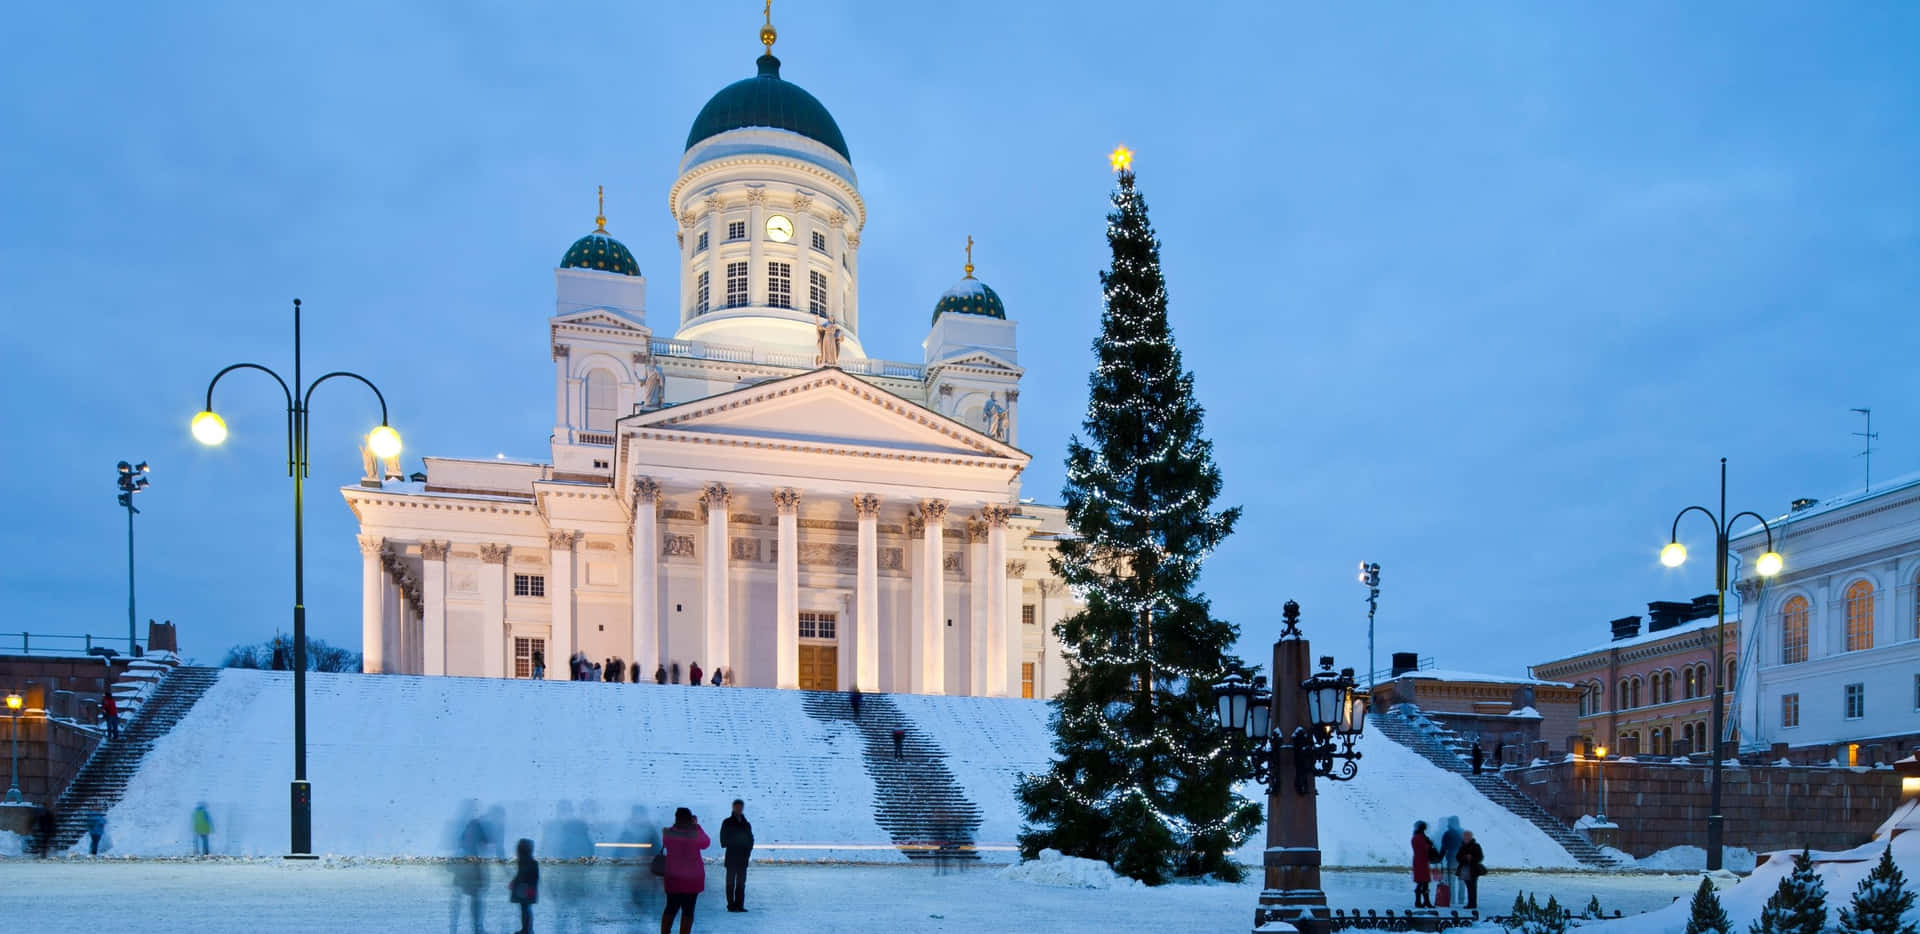 A Church With A Large White Dome And A Snow Covered Square Wallpaper